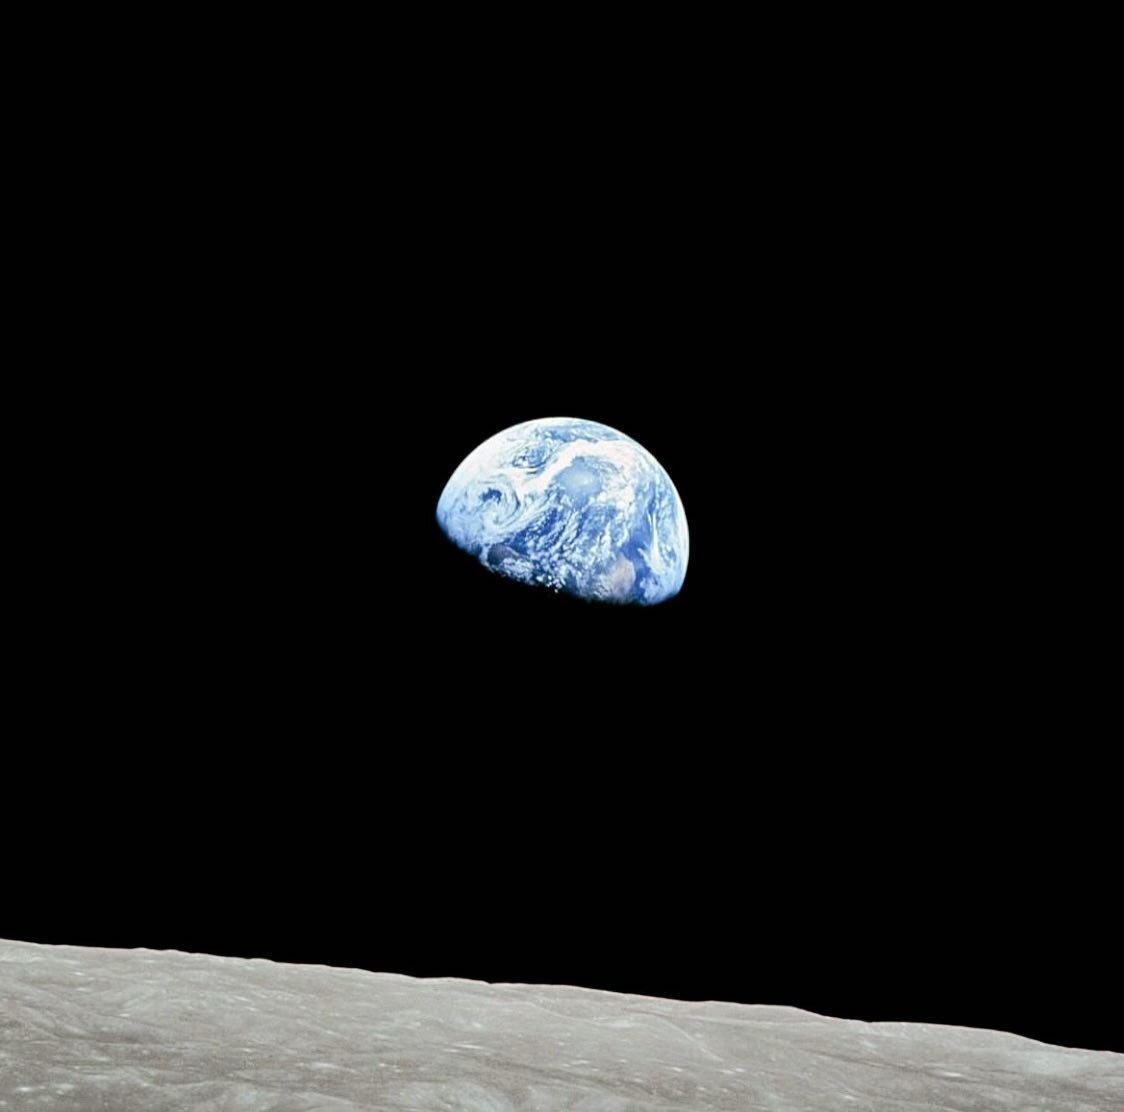 Earth Rise⁣
⁣
Floating like a silver raft⁣
in space, and we see the face of our planet anew.⁣
We relish the view;⁣
We witness its round green and brilliant blue,⁣
Which inspires us to ask deeply, wholly:⁣
What can we do?⁣
Open your eyes.⁣
Know that t